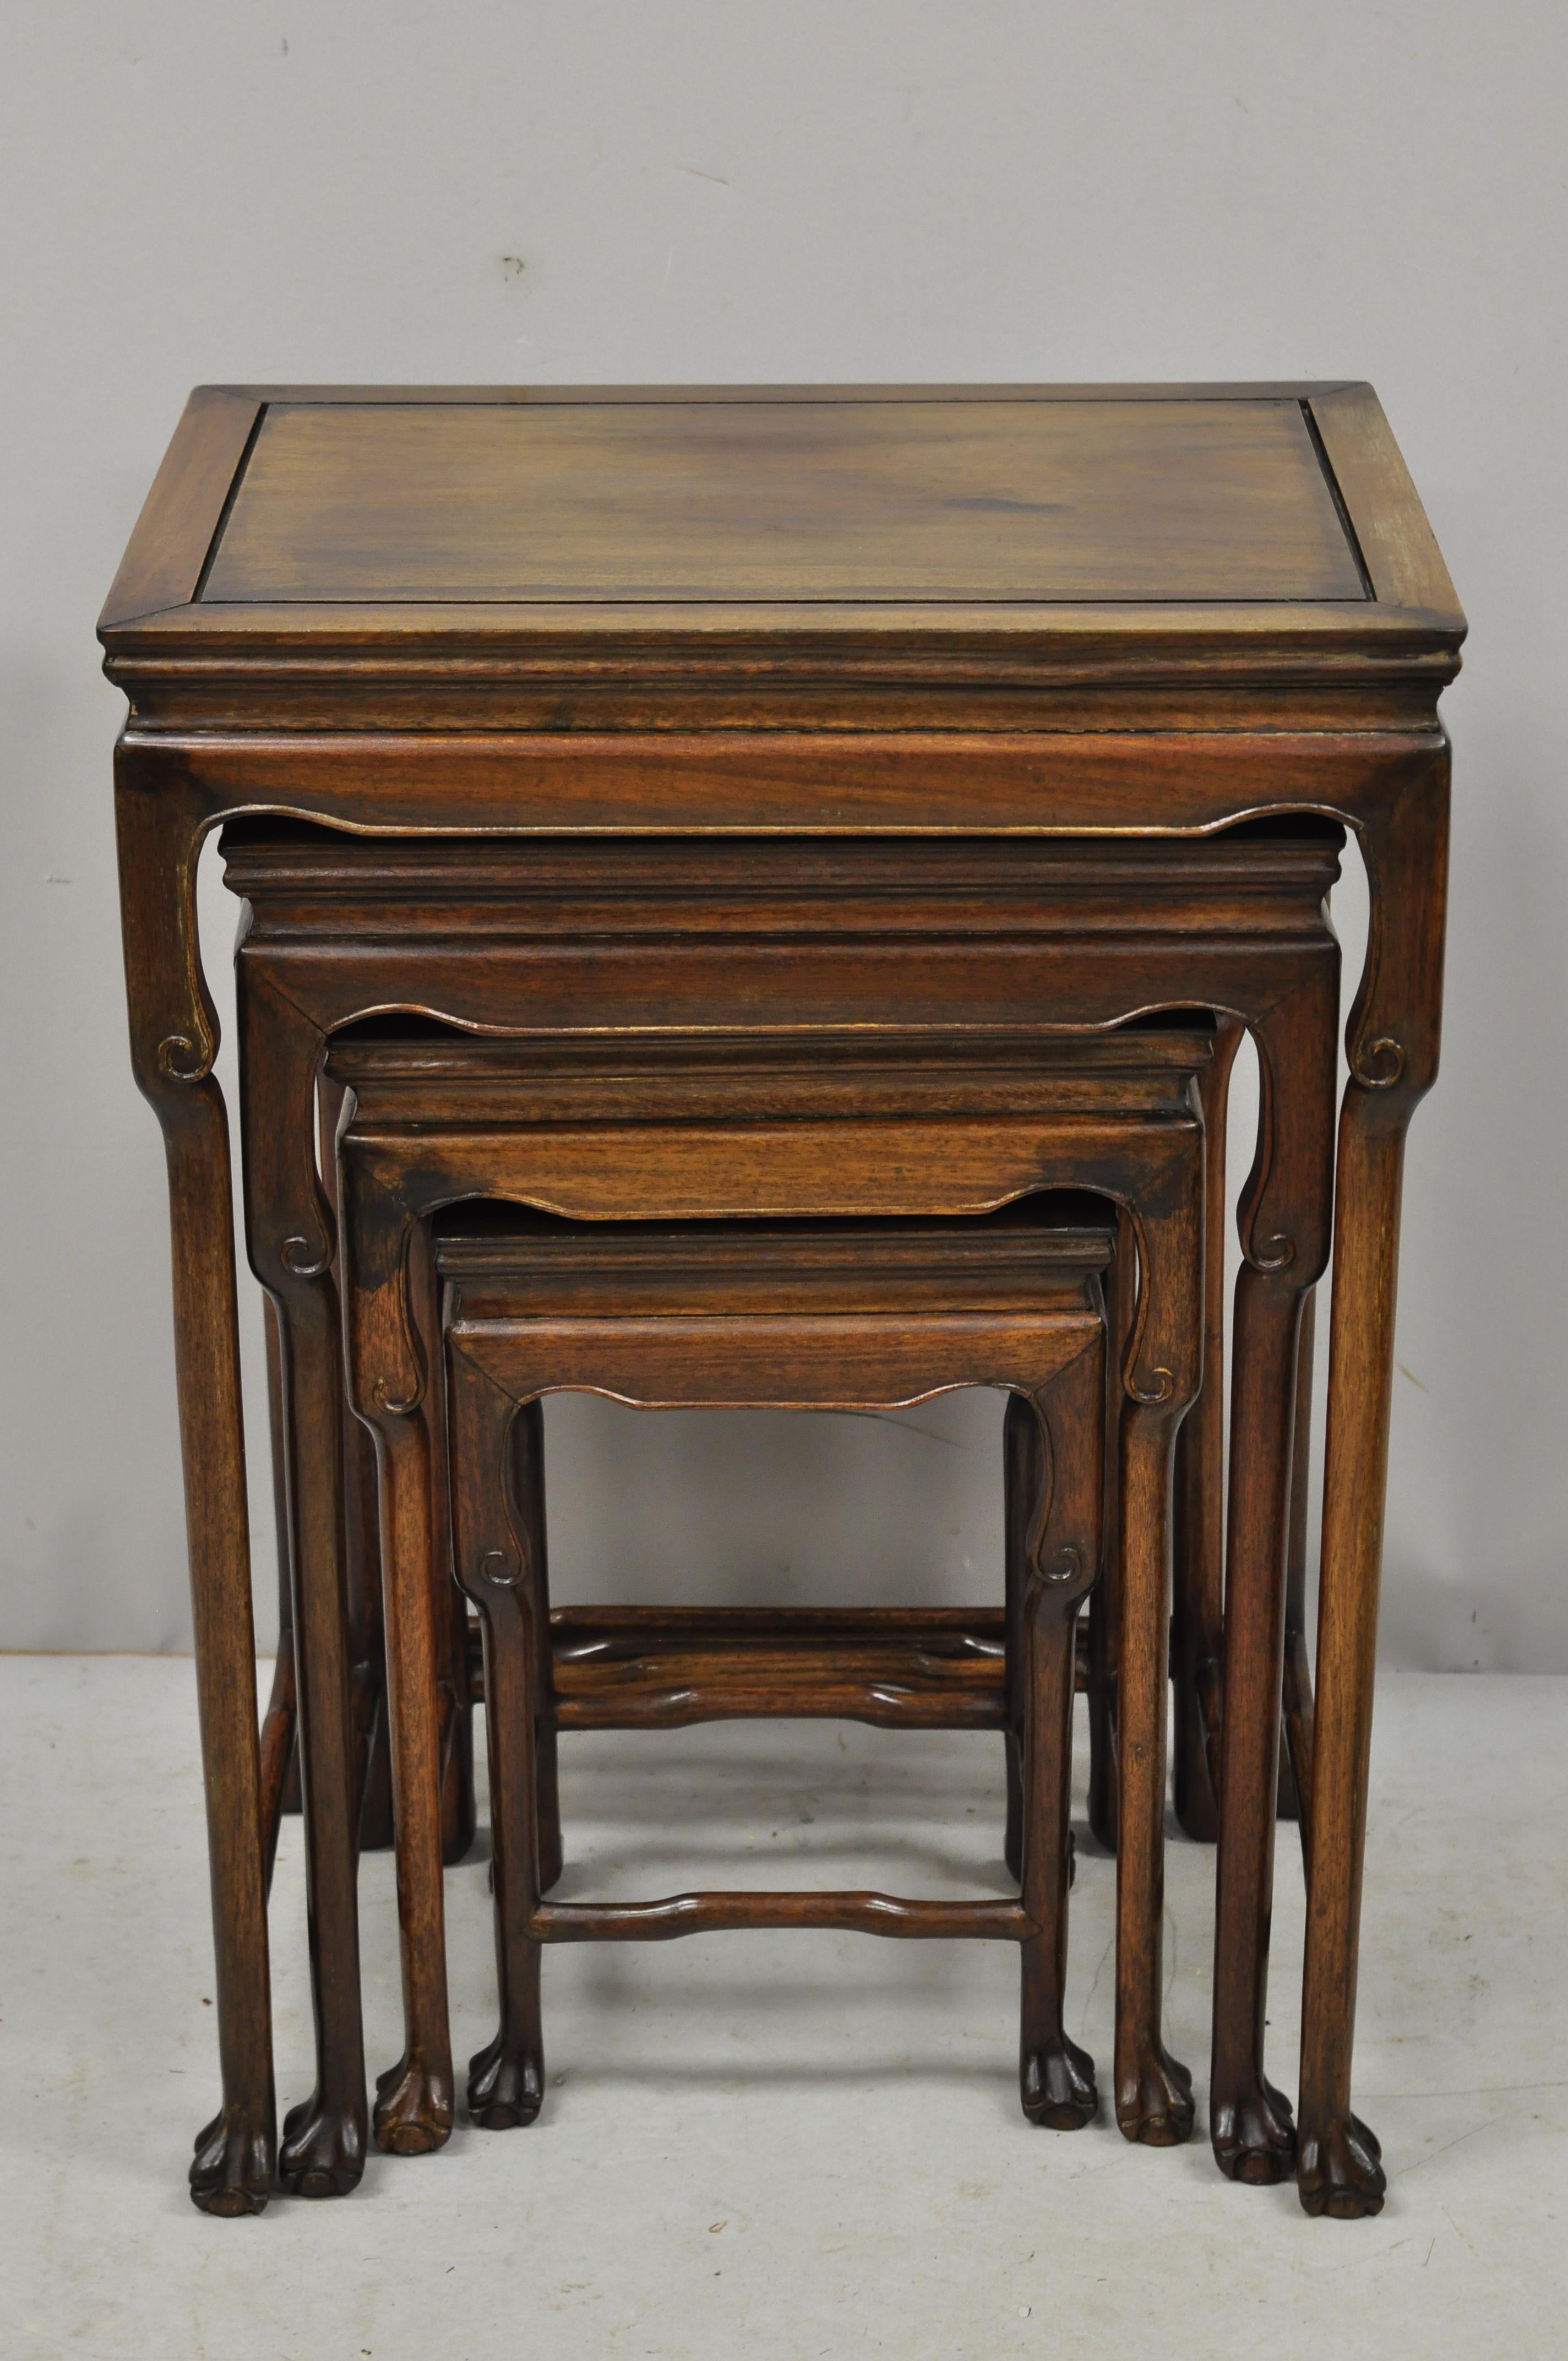 4 vintage Chinese carved hardwood rosewood nesting side tables with paw feet. Listing includes a solid wood construction, beautiful wood grain, nicely carved details, quality American craftsmanship, great style and form, circa mid-20th century.